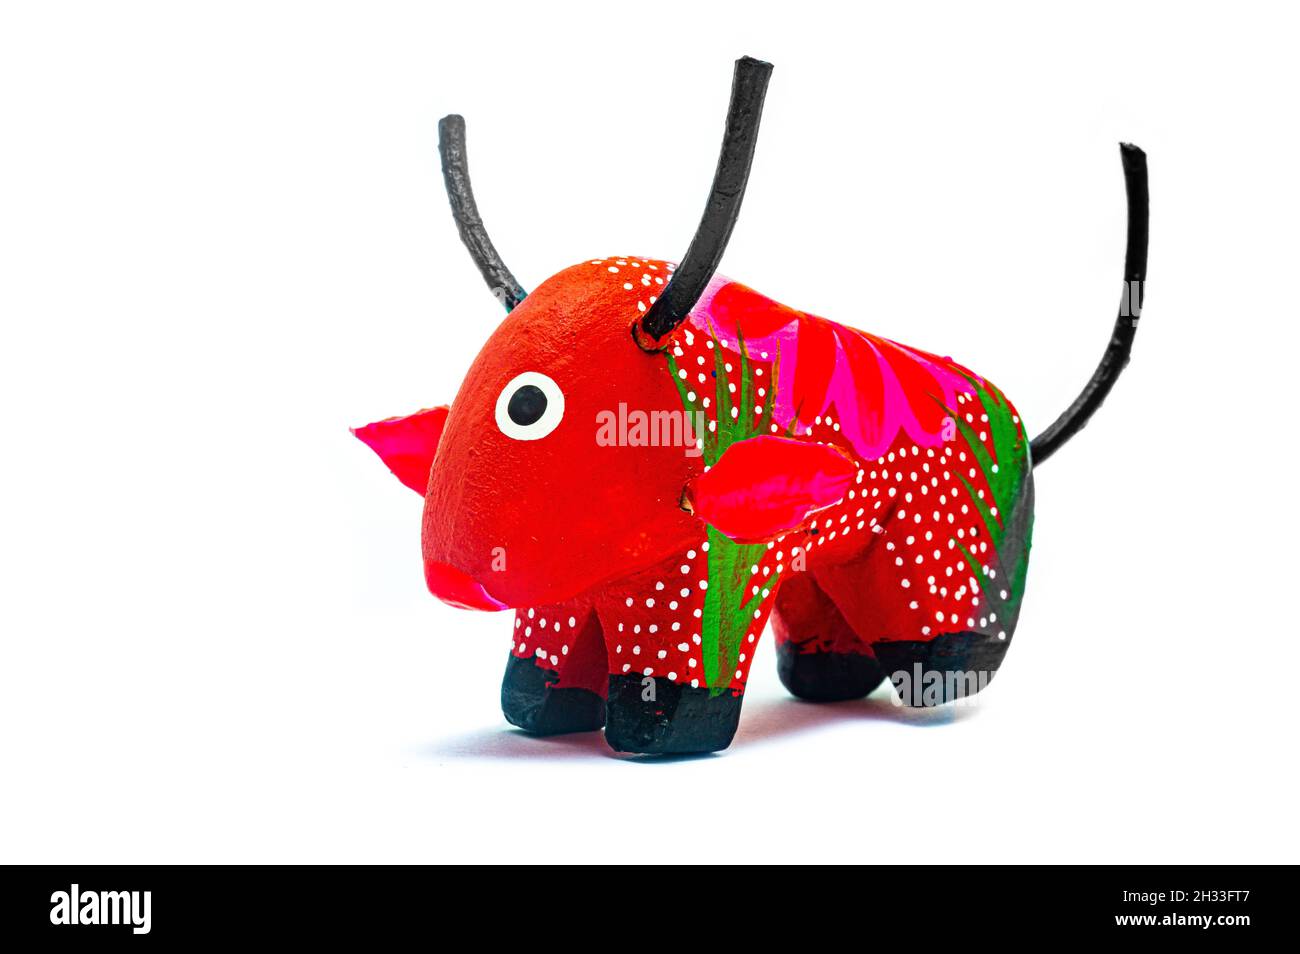 Fantastic and colorful bull alebrije from Mexico Stock Photo